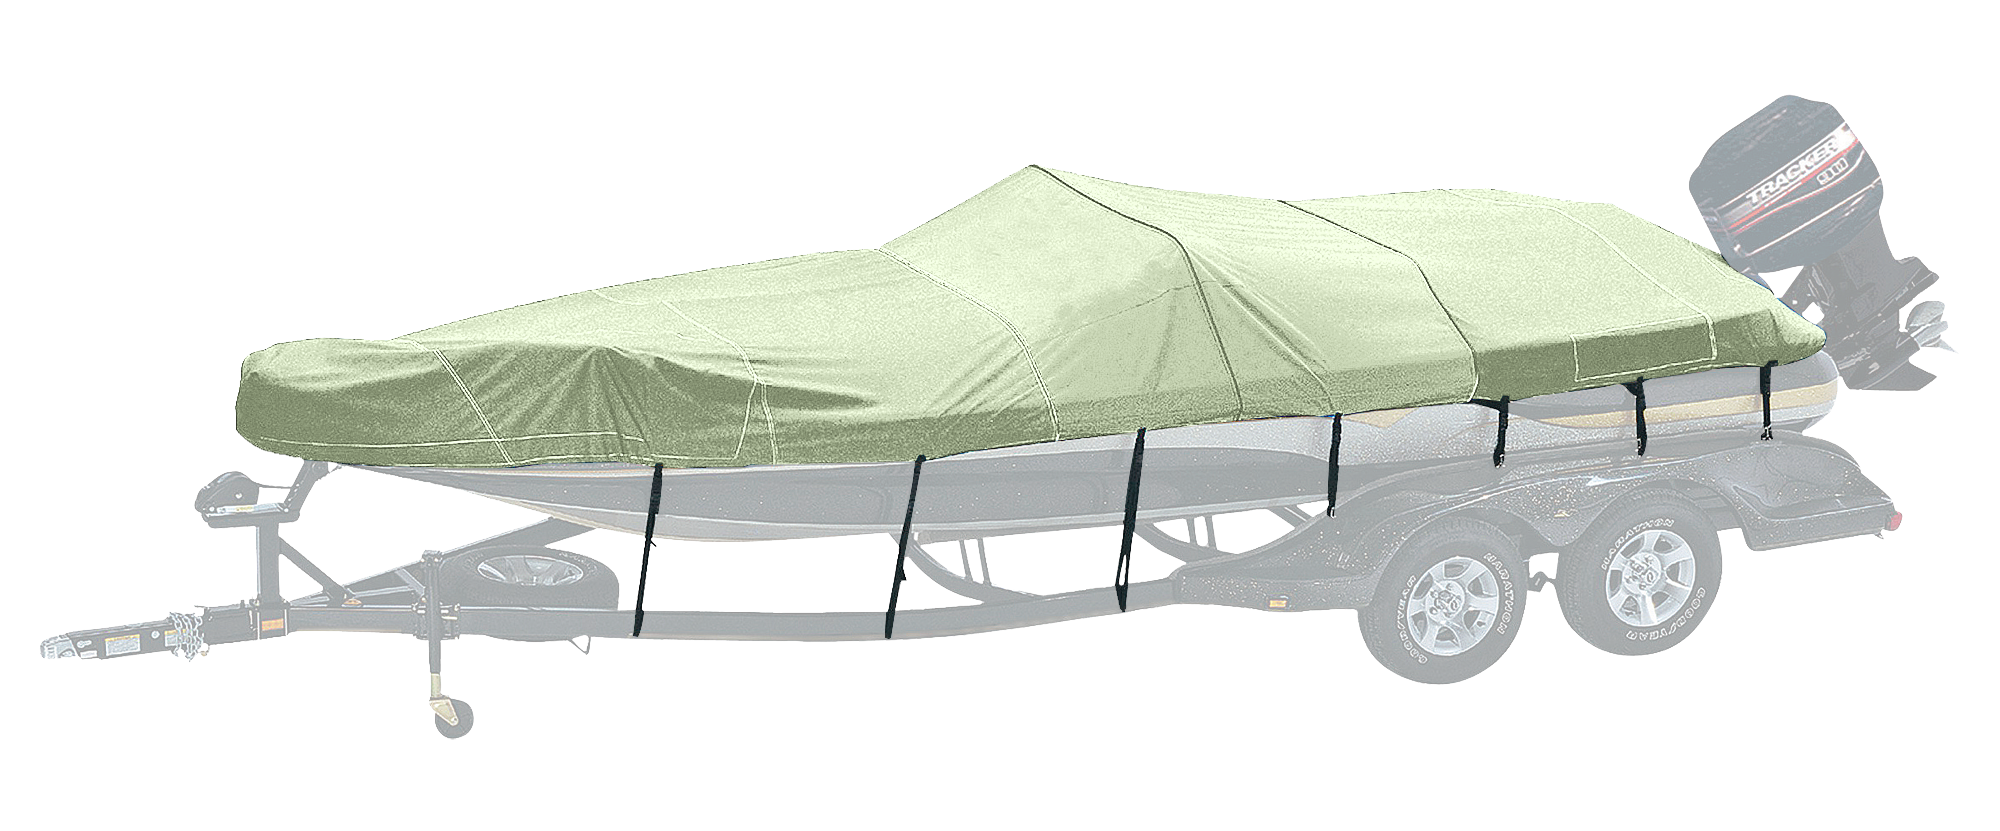 Bass Pro Shops Exact Fit Custom Boat Cover by Westland - Tracker Boats - 2004-2005 Tundra 21 DC - Linen